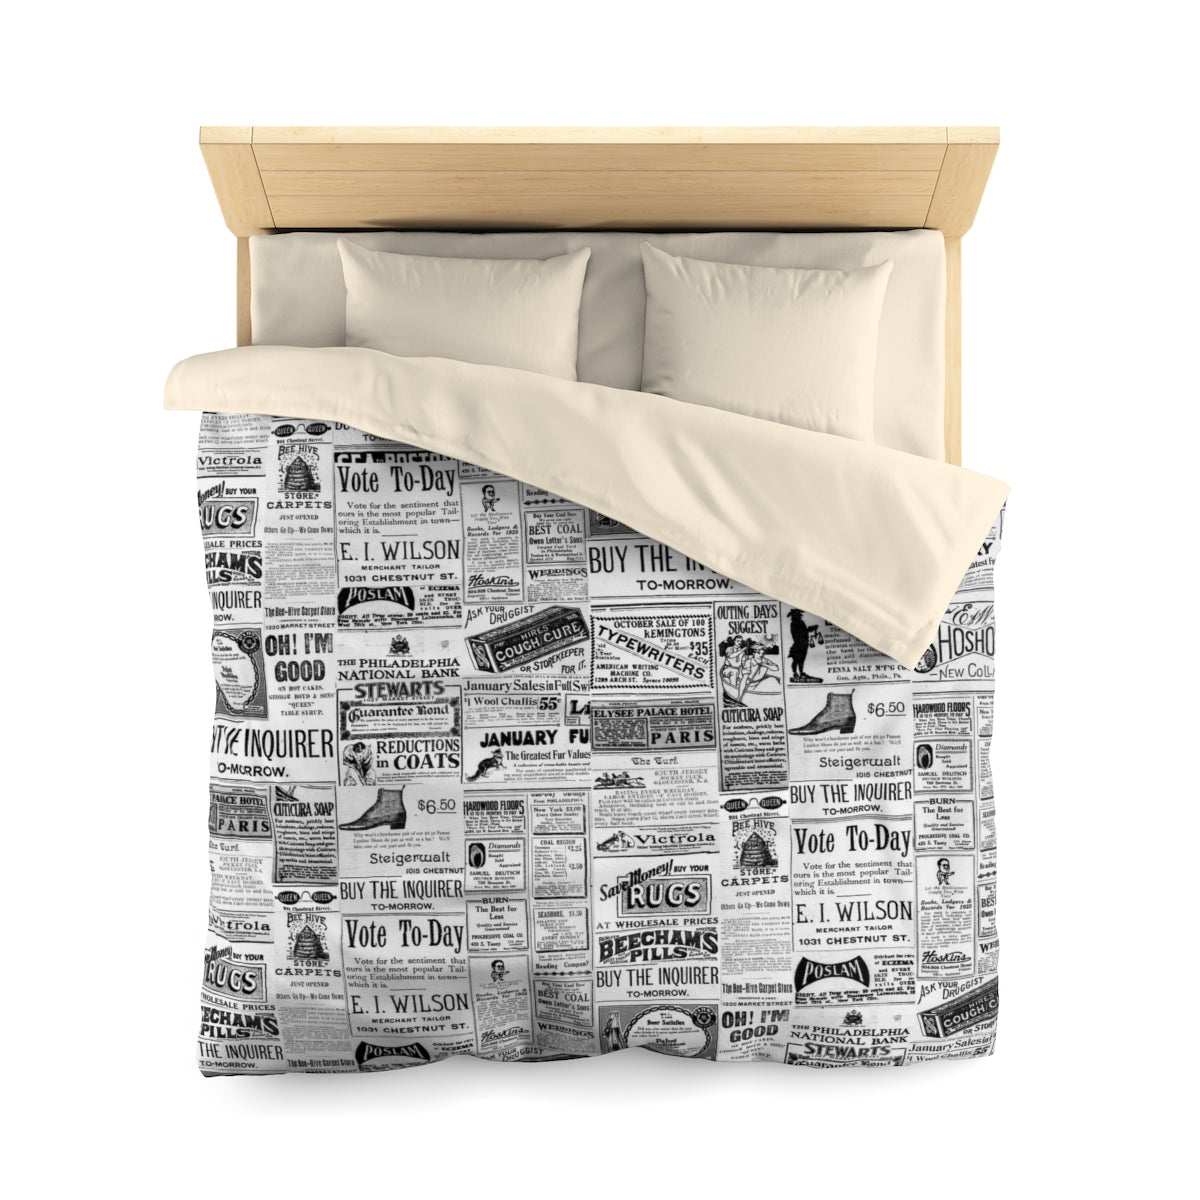 Vintage Ad Duvet Cover The Inquirer Store